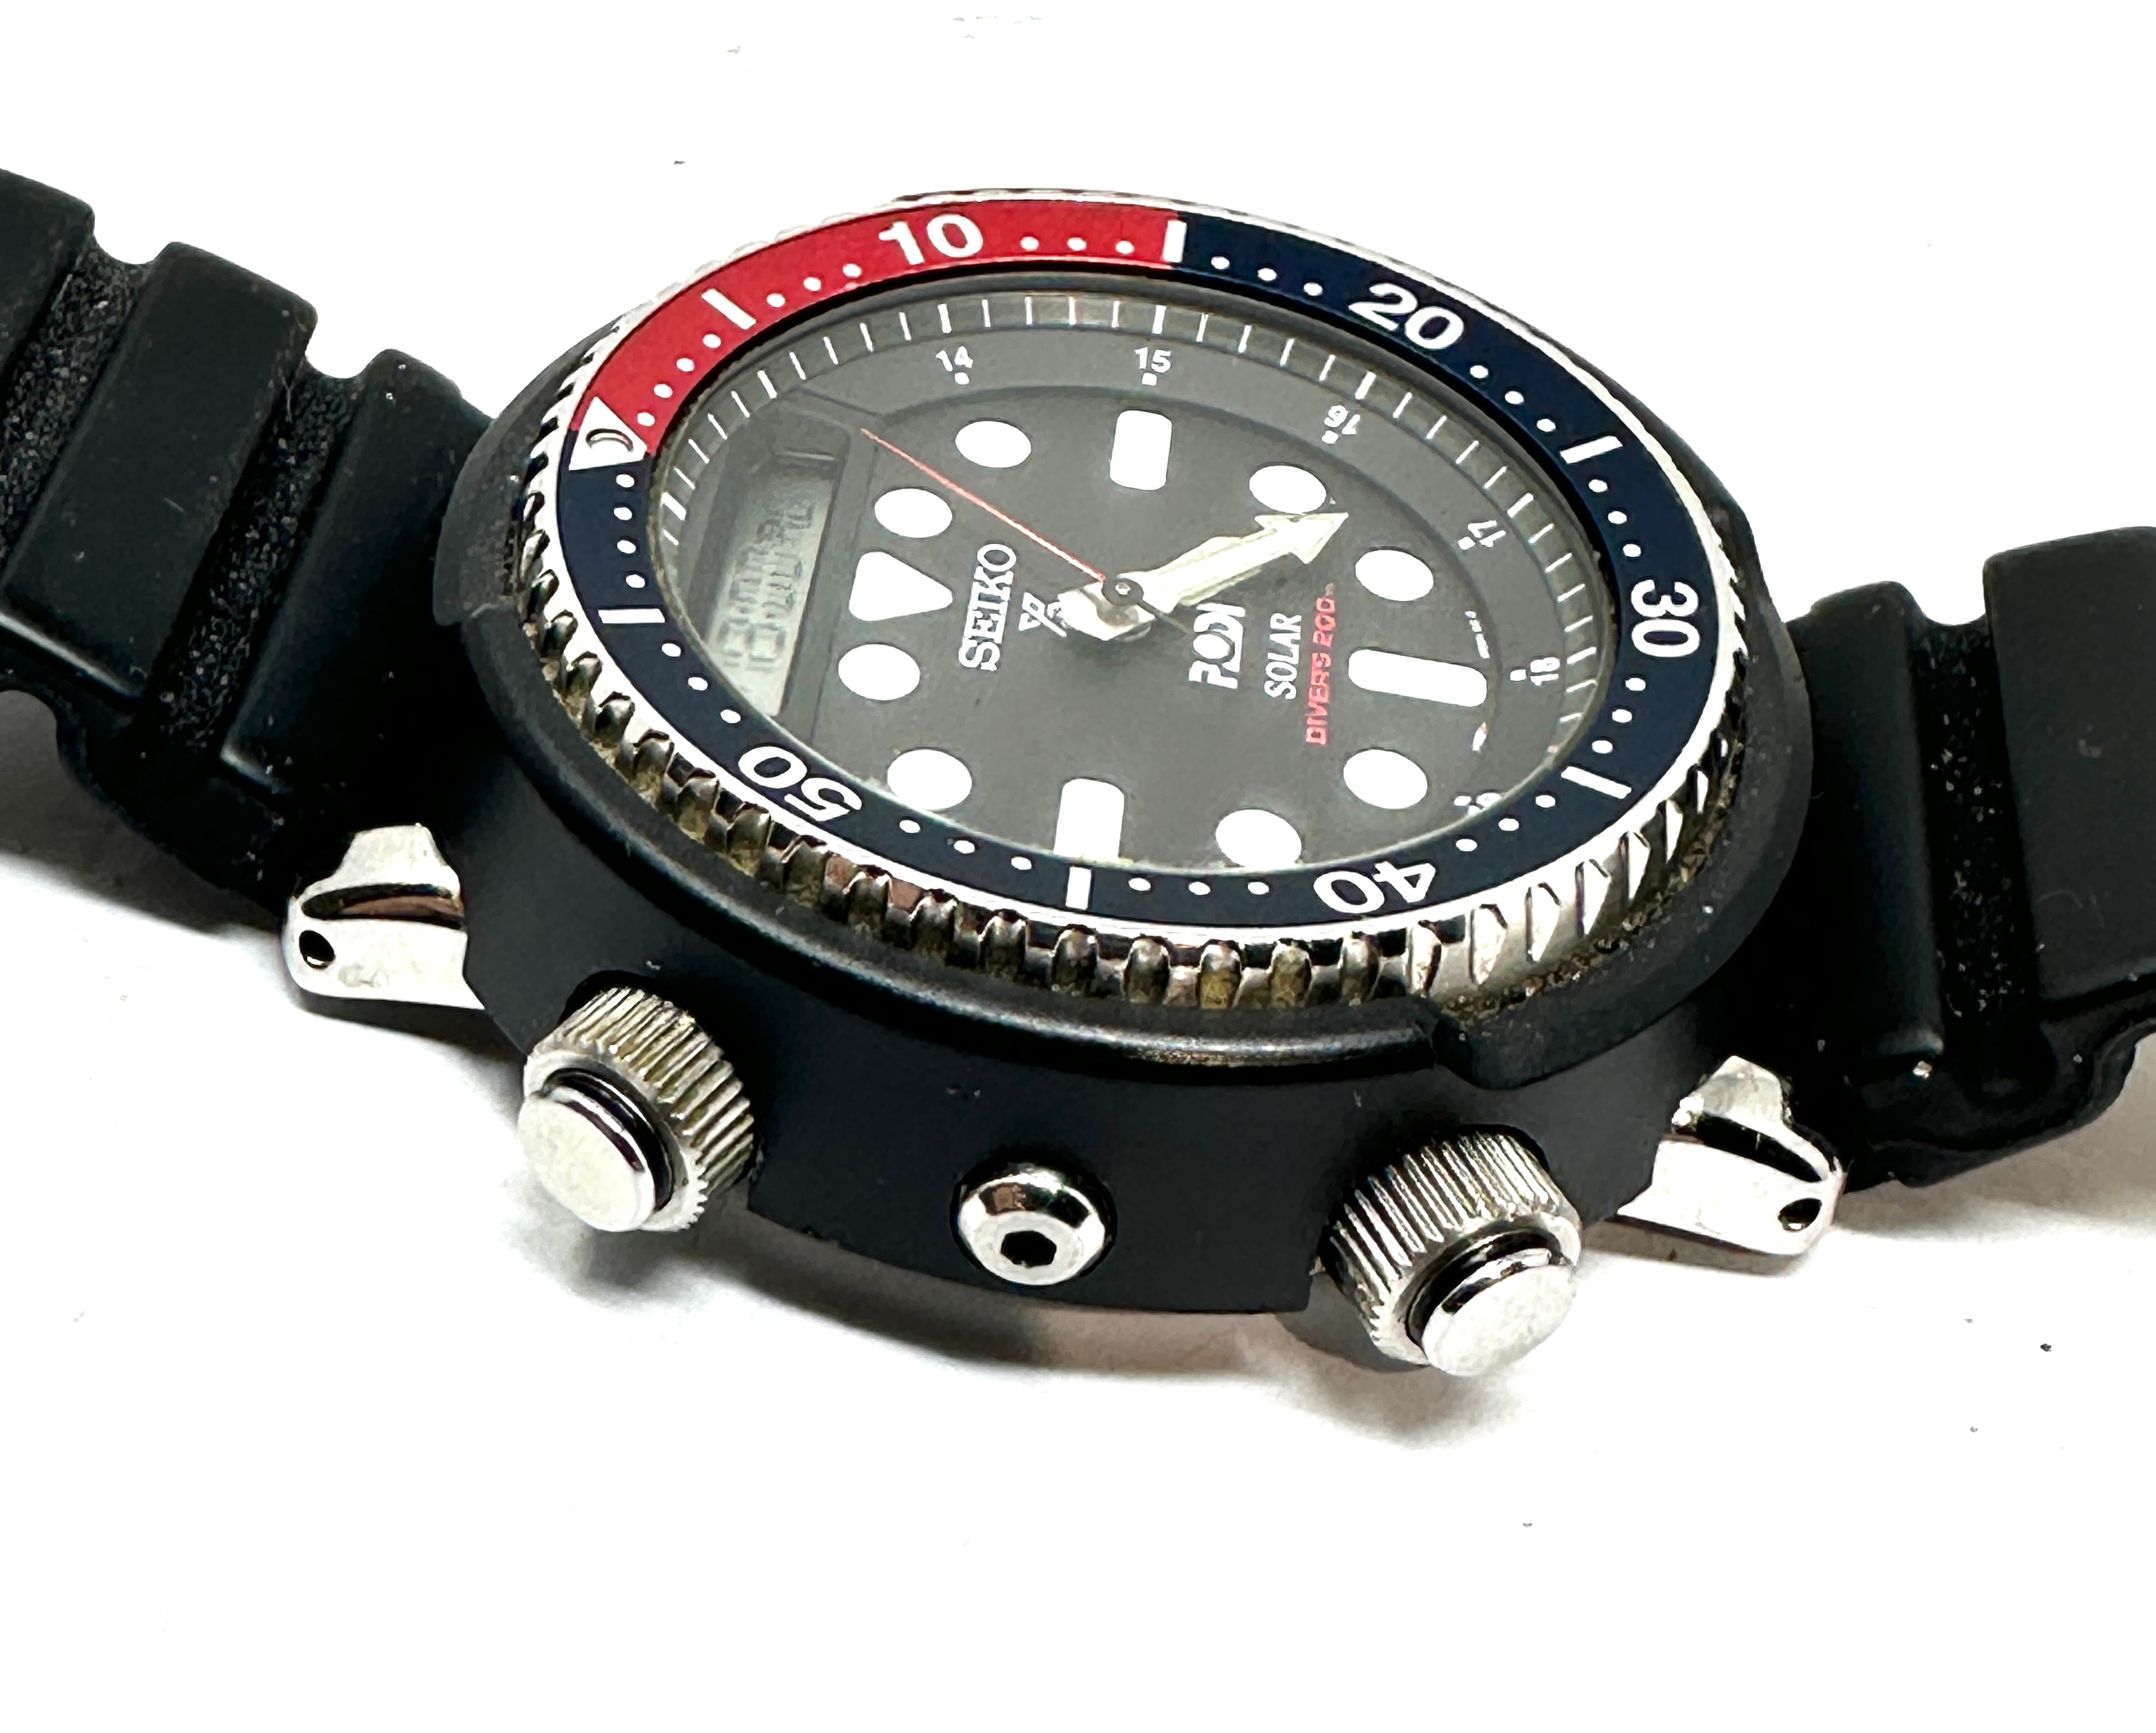 Seiko X PADI Diver 200M Solar H851-00A0 Men's Watch In working order in very good condition - Image 2 of 5